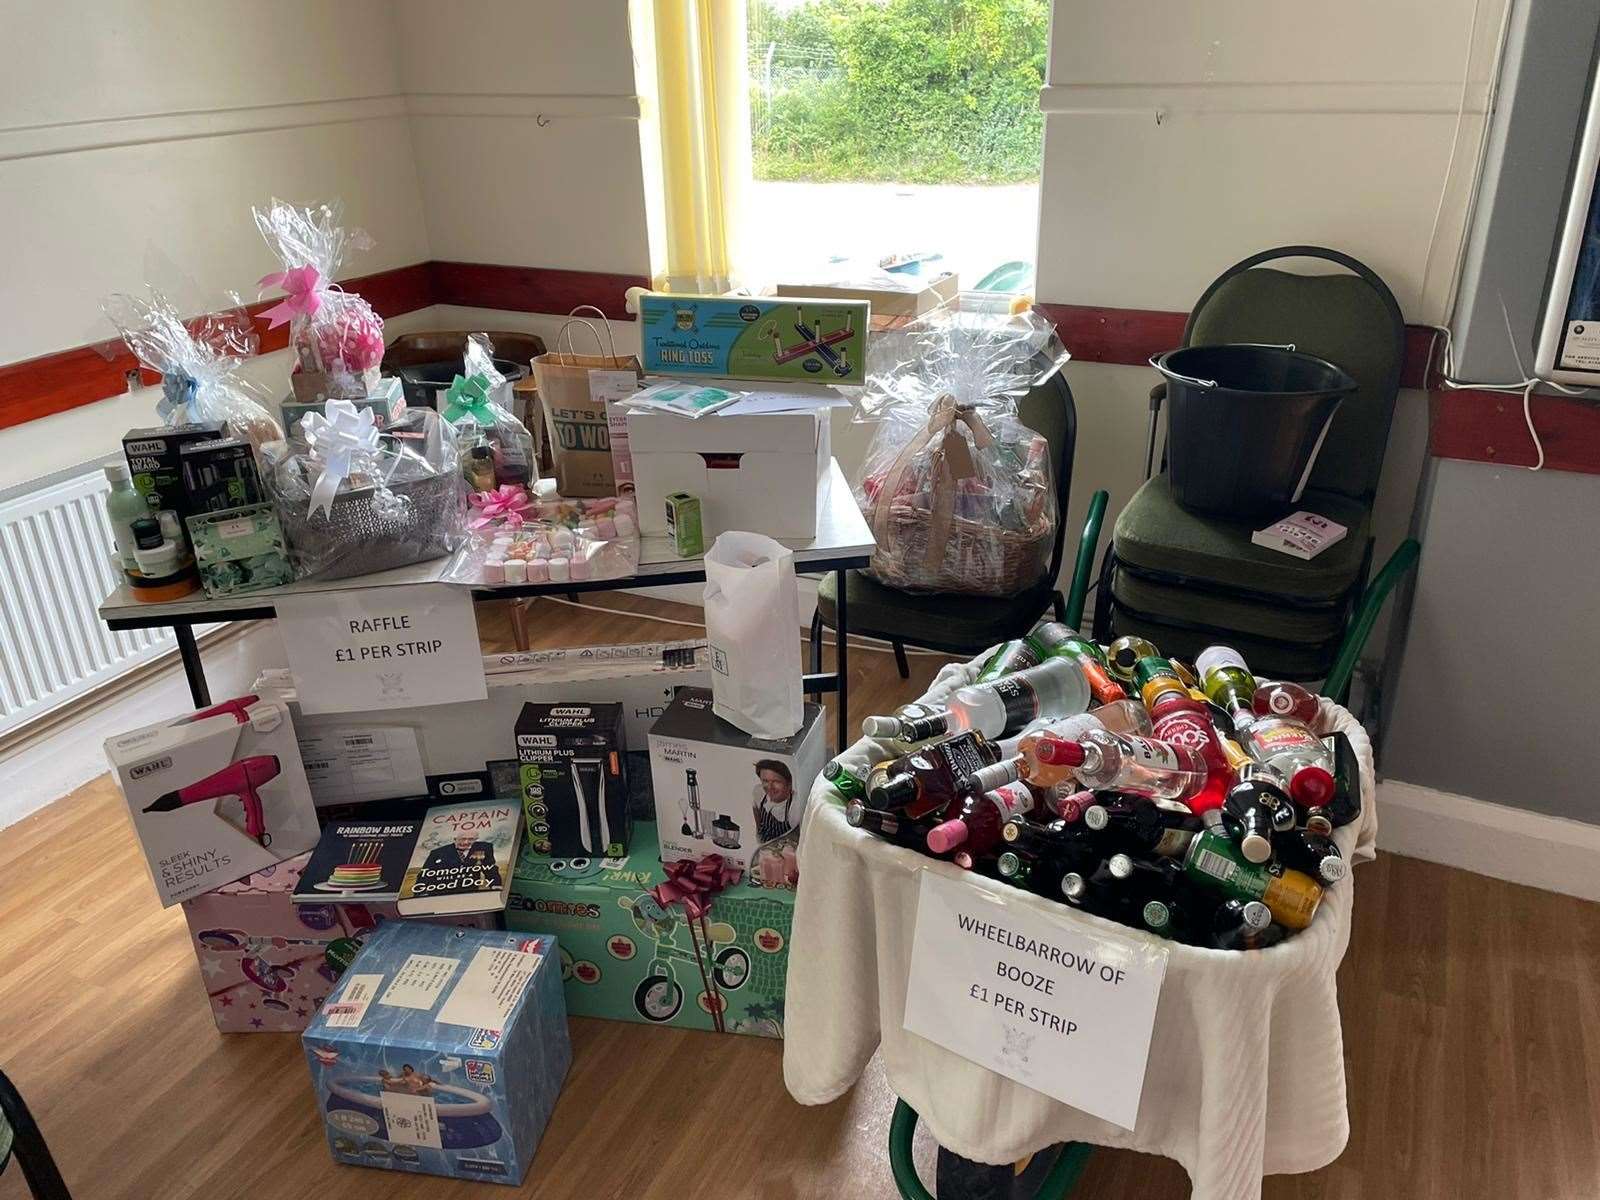 A raffle raked in the finds for the Aylesham girl